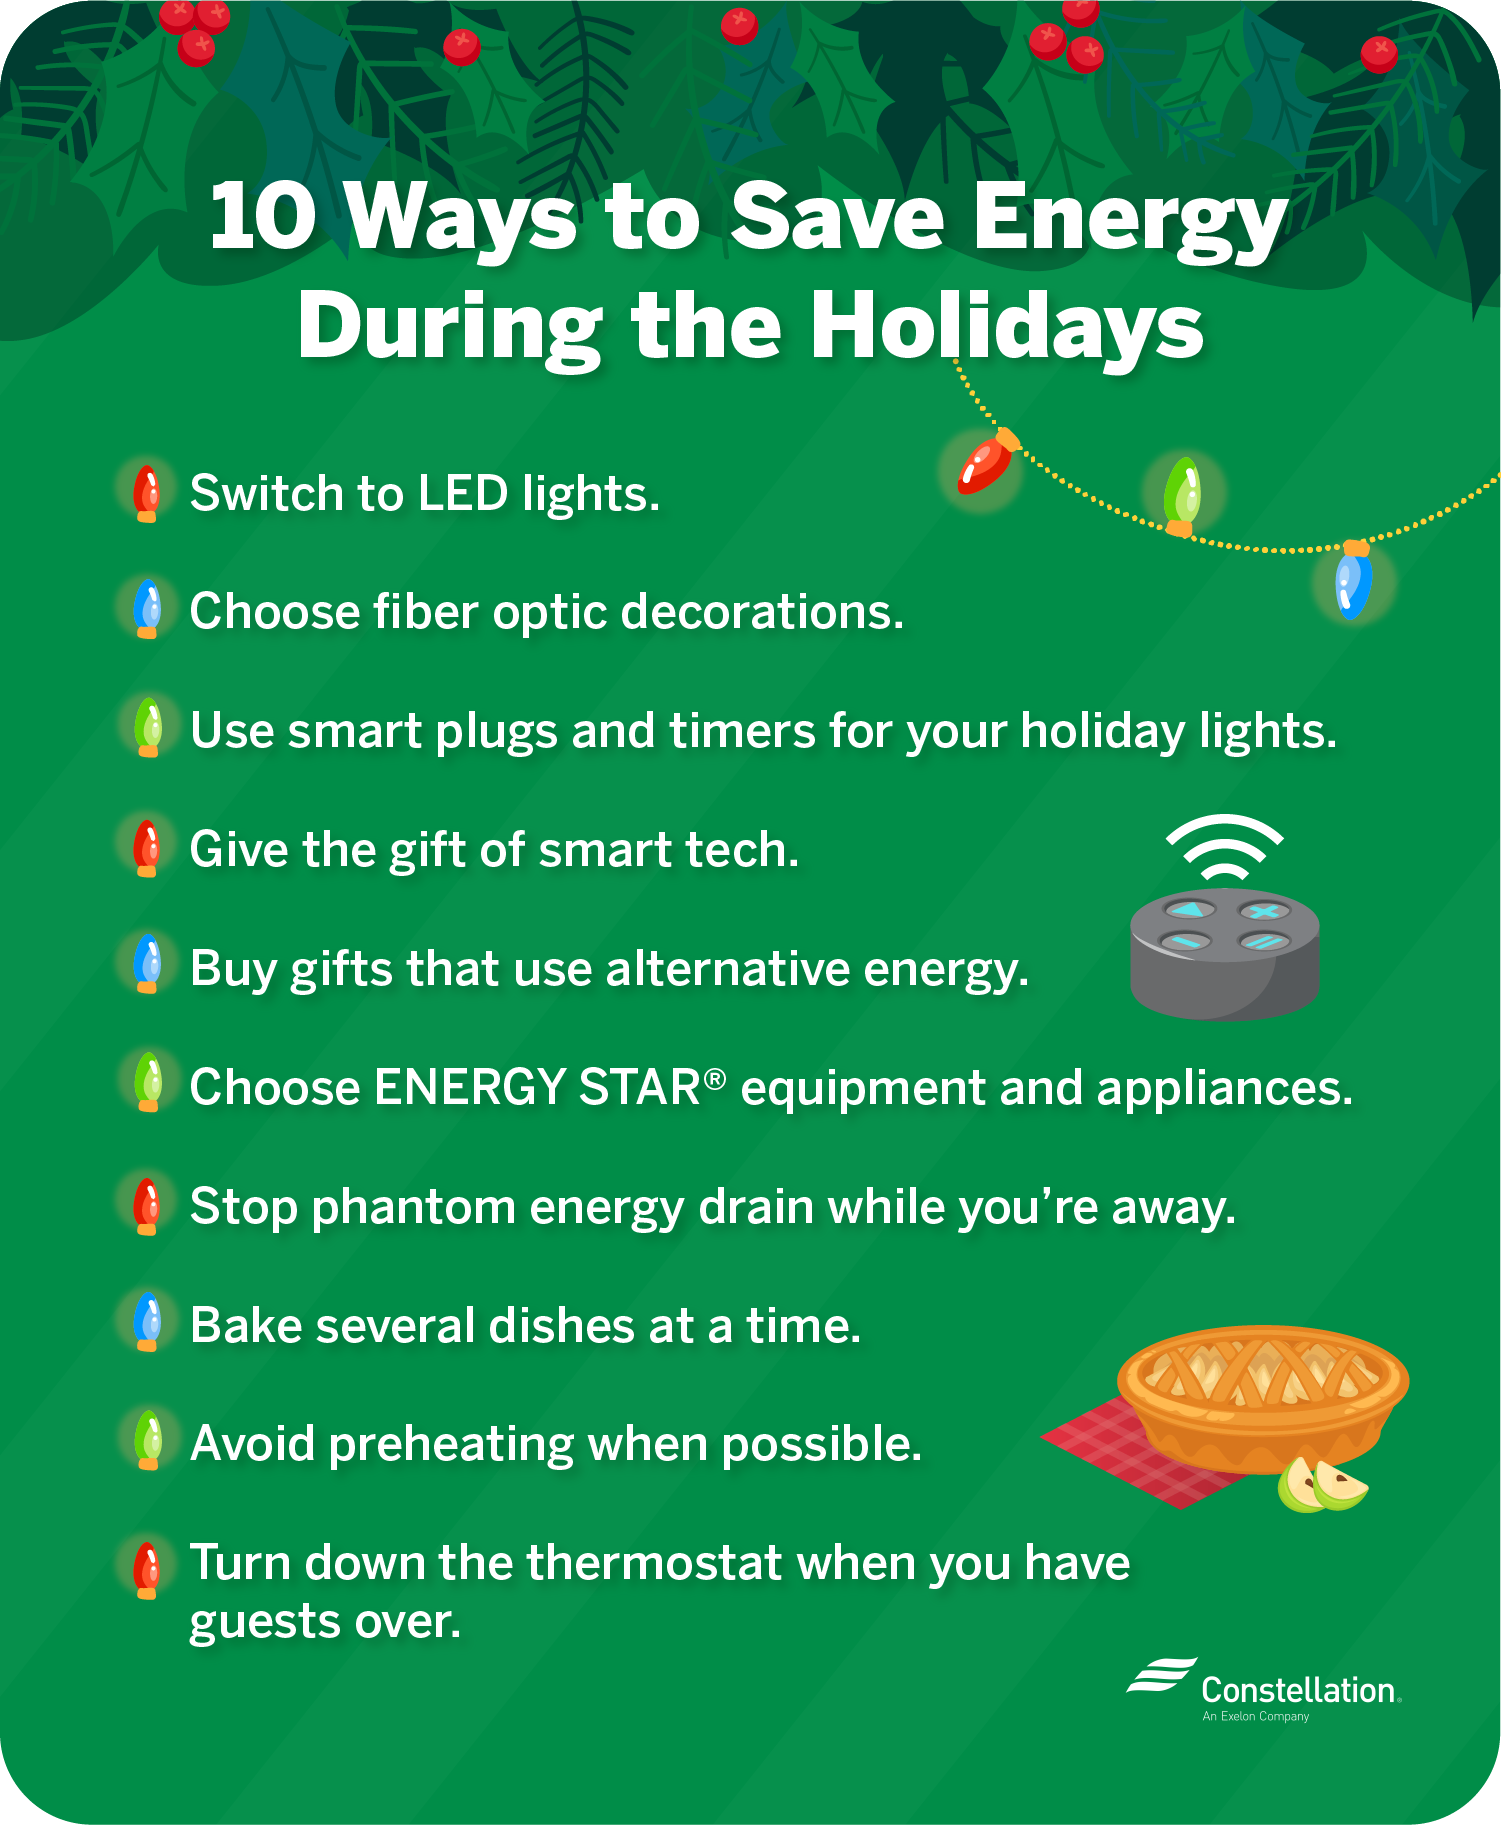 10 ways to save energy during the holidays